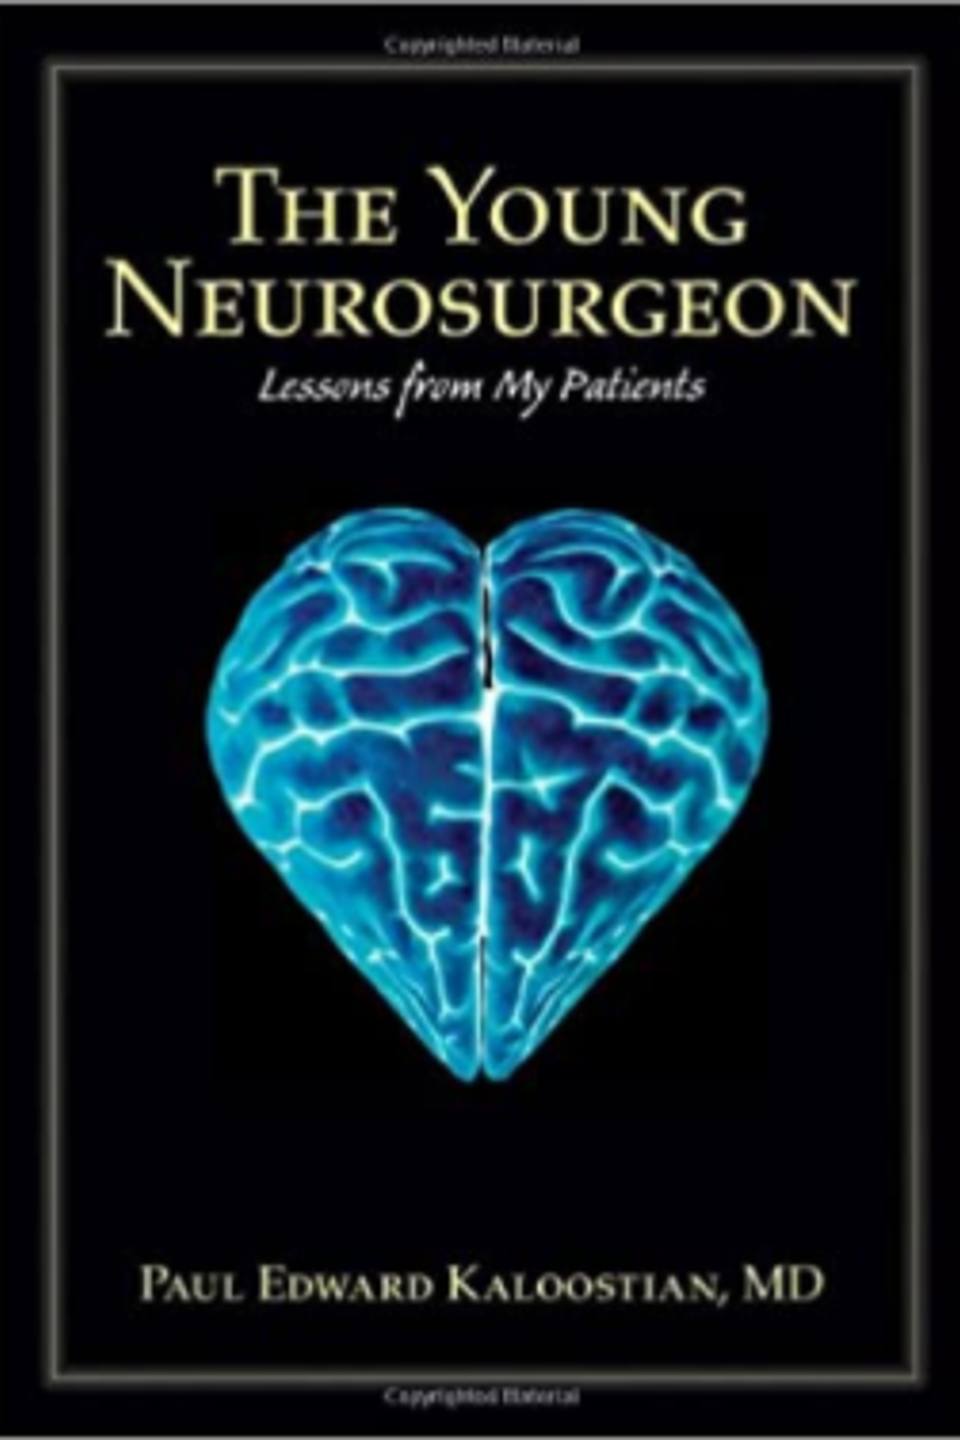 The young neurosurgeon by paul e kaloostian